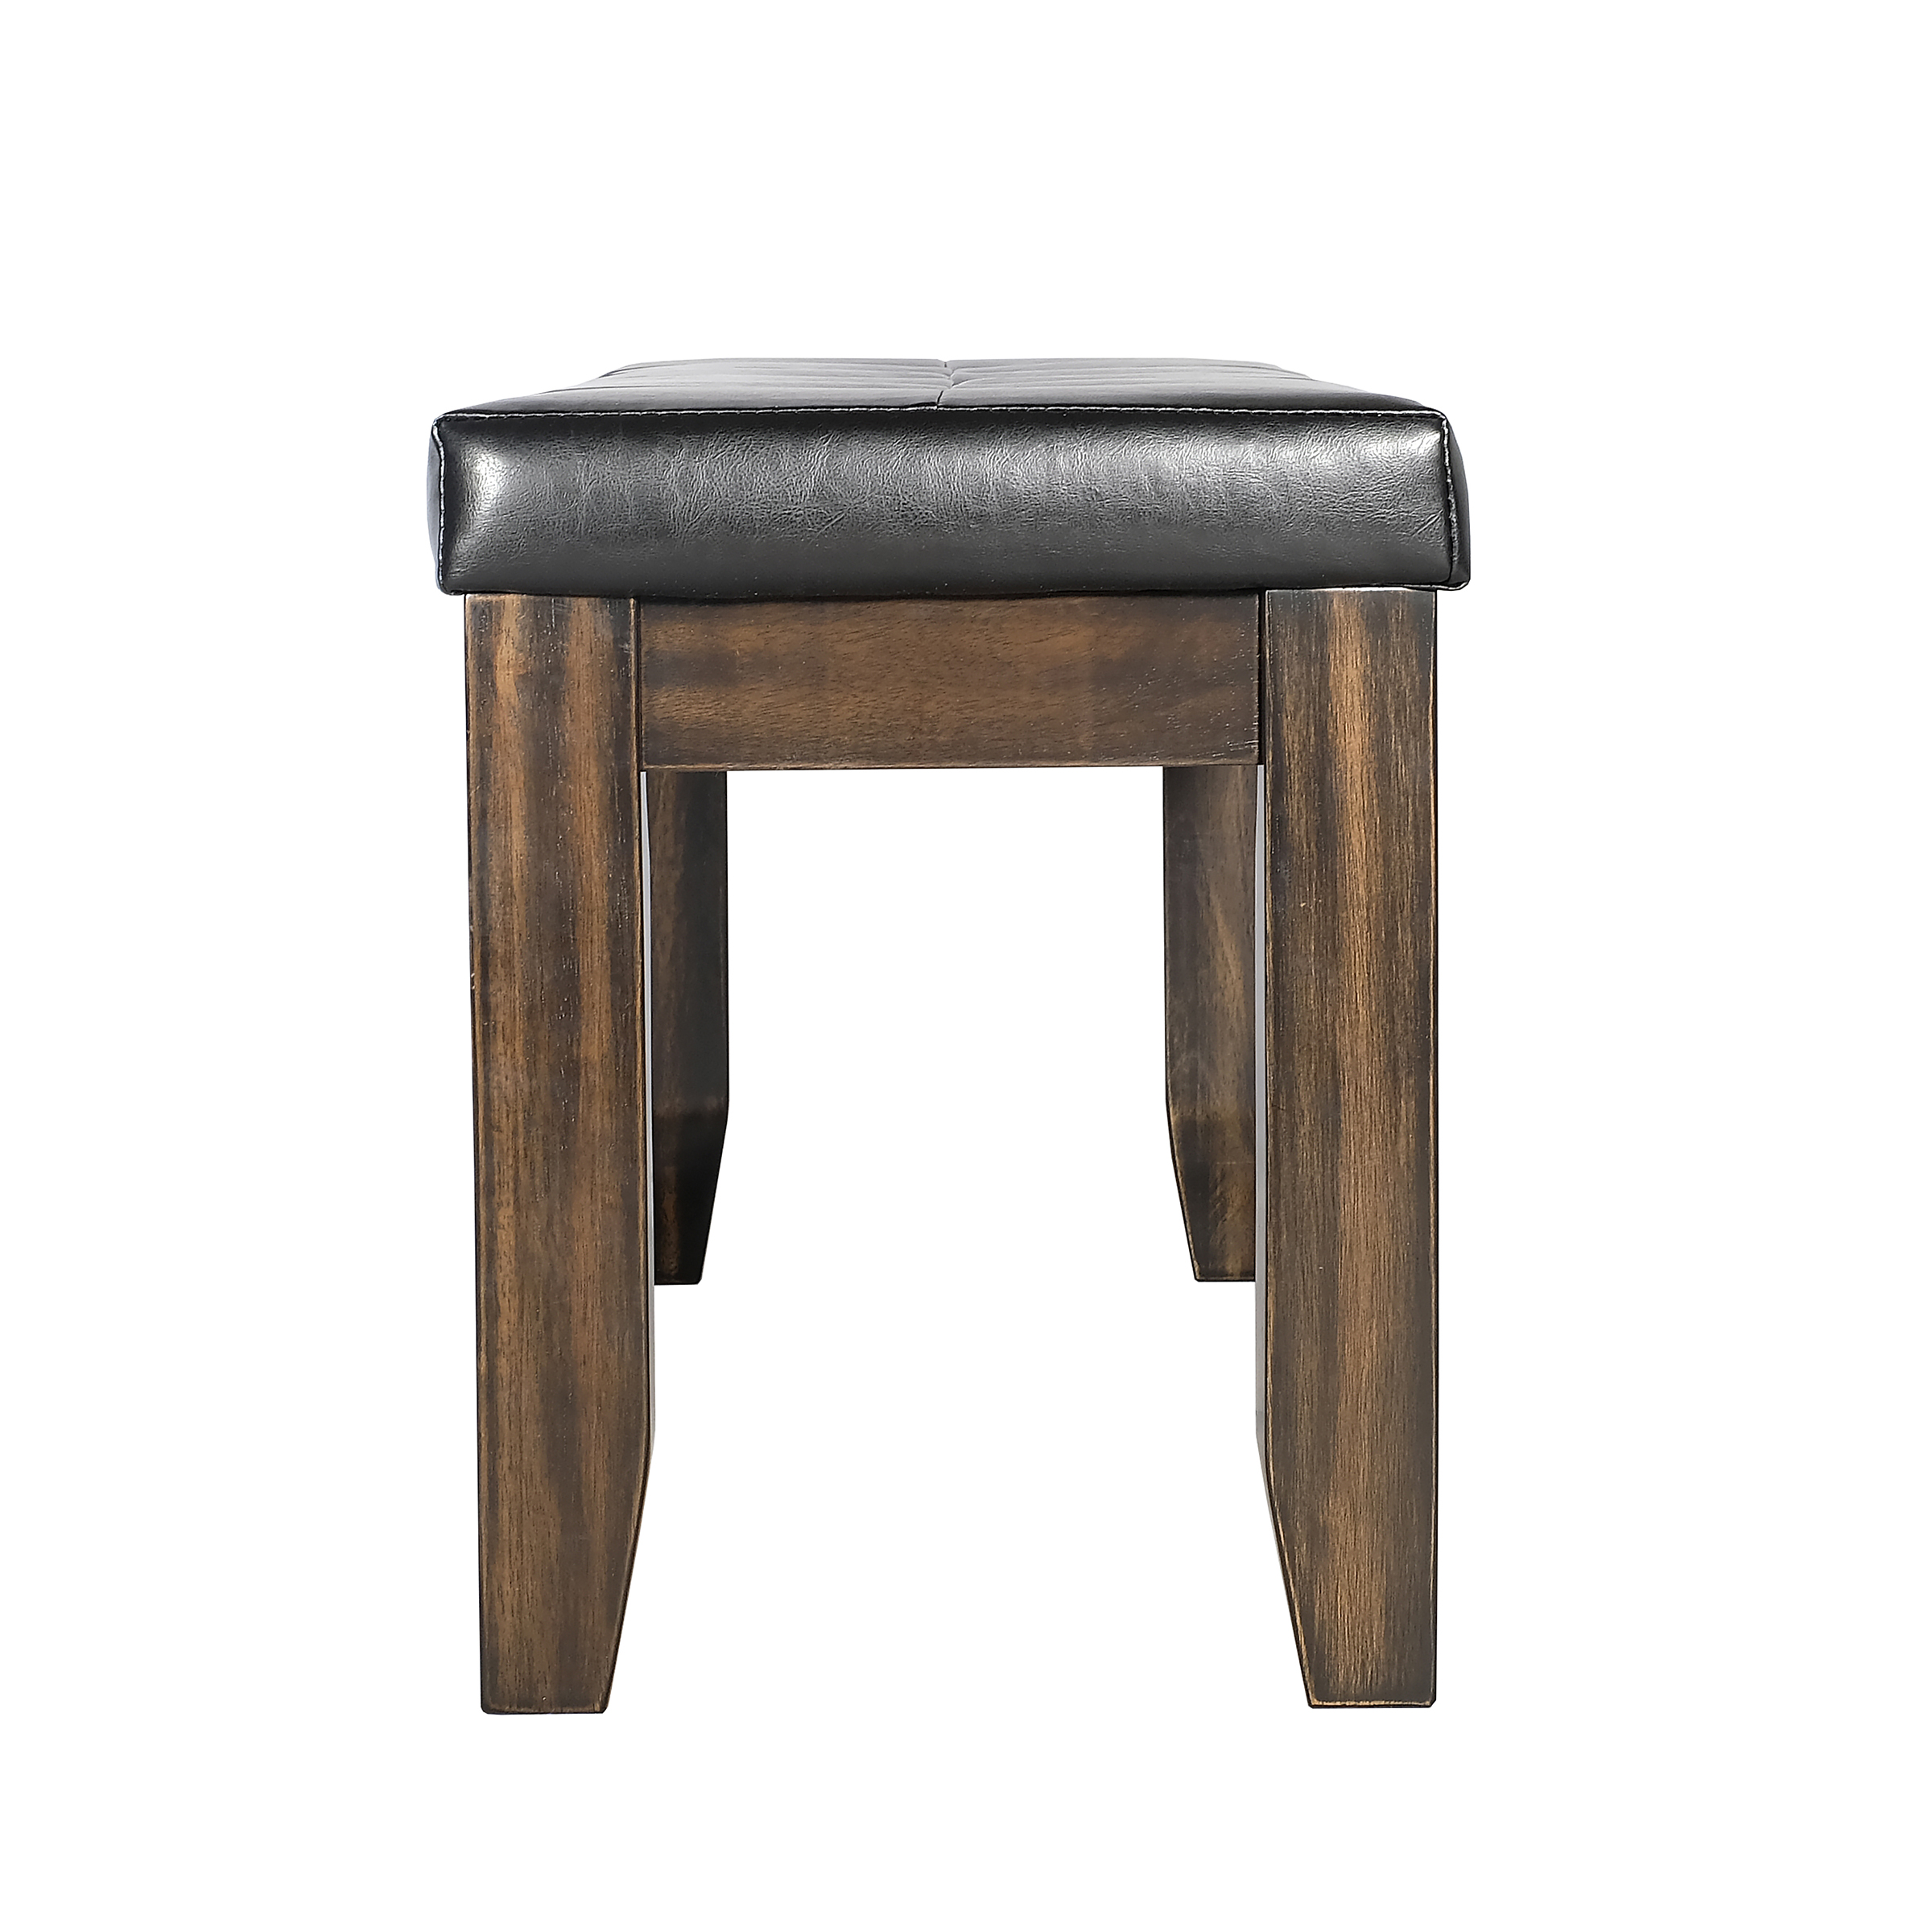 Primo International Charlie Dining Bench - image 4 of 6